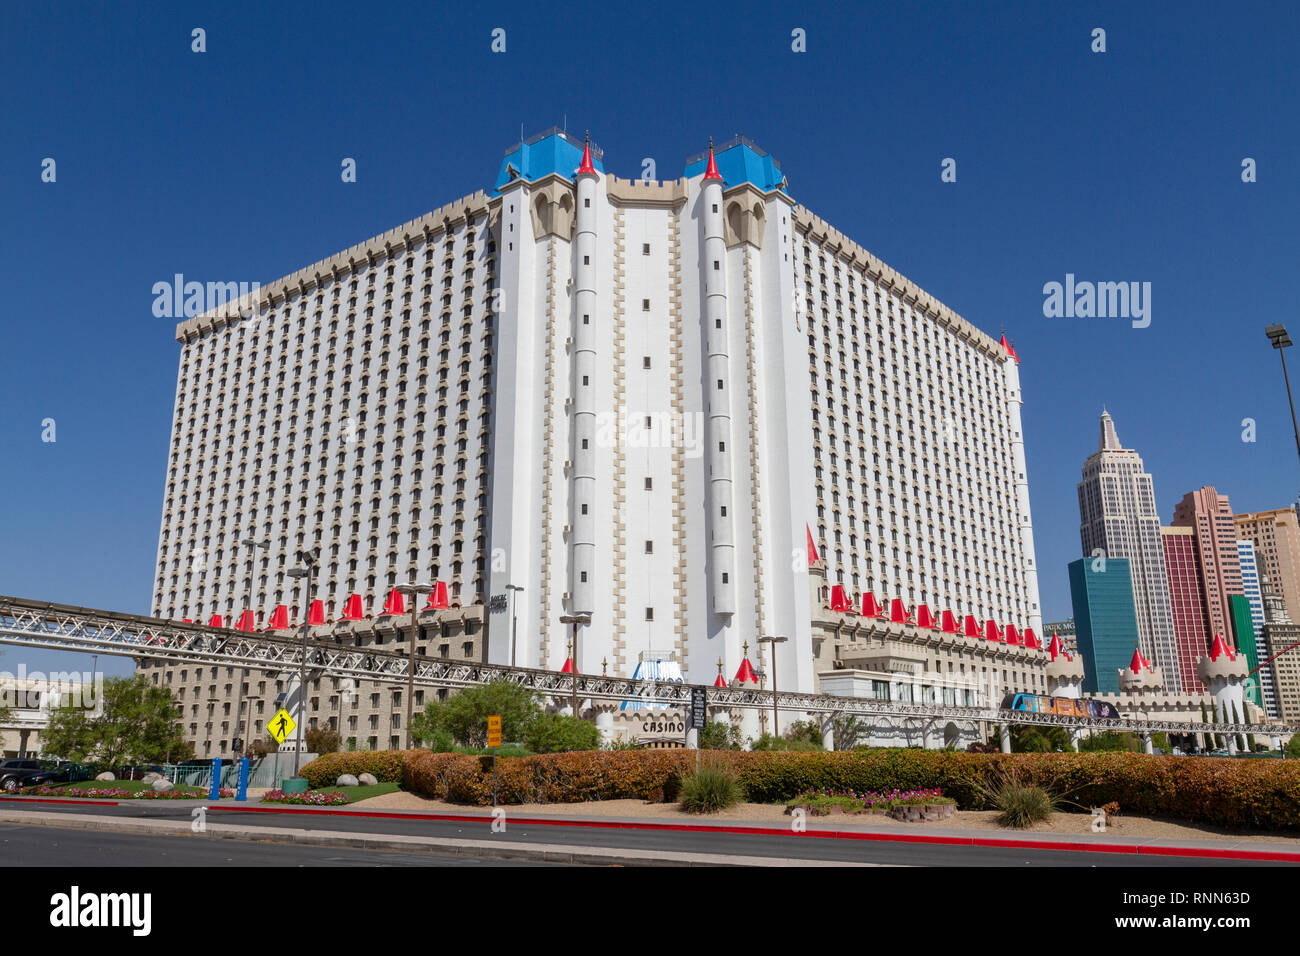 The Excalibur Hotel & Casino on The Strip in Las Vegas, Nevada, United States. Stock Photo